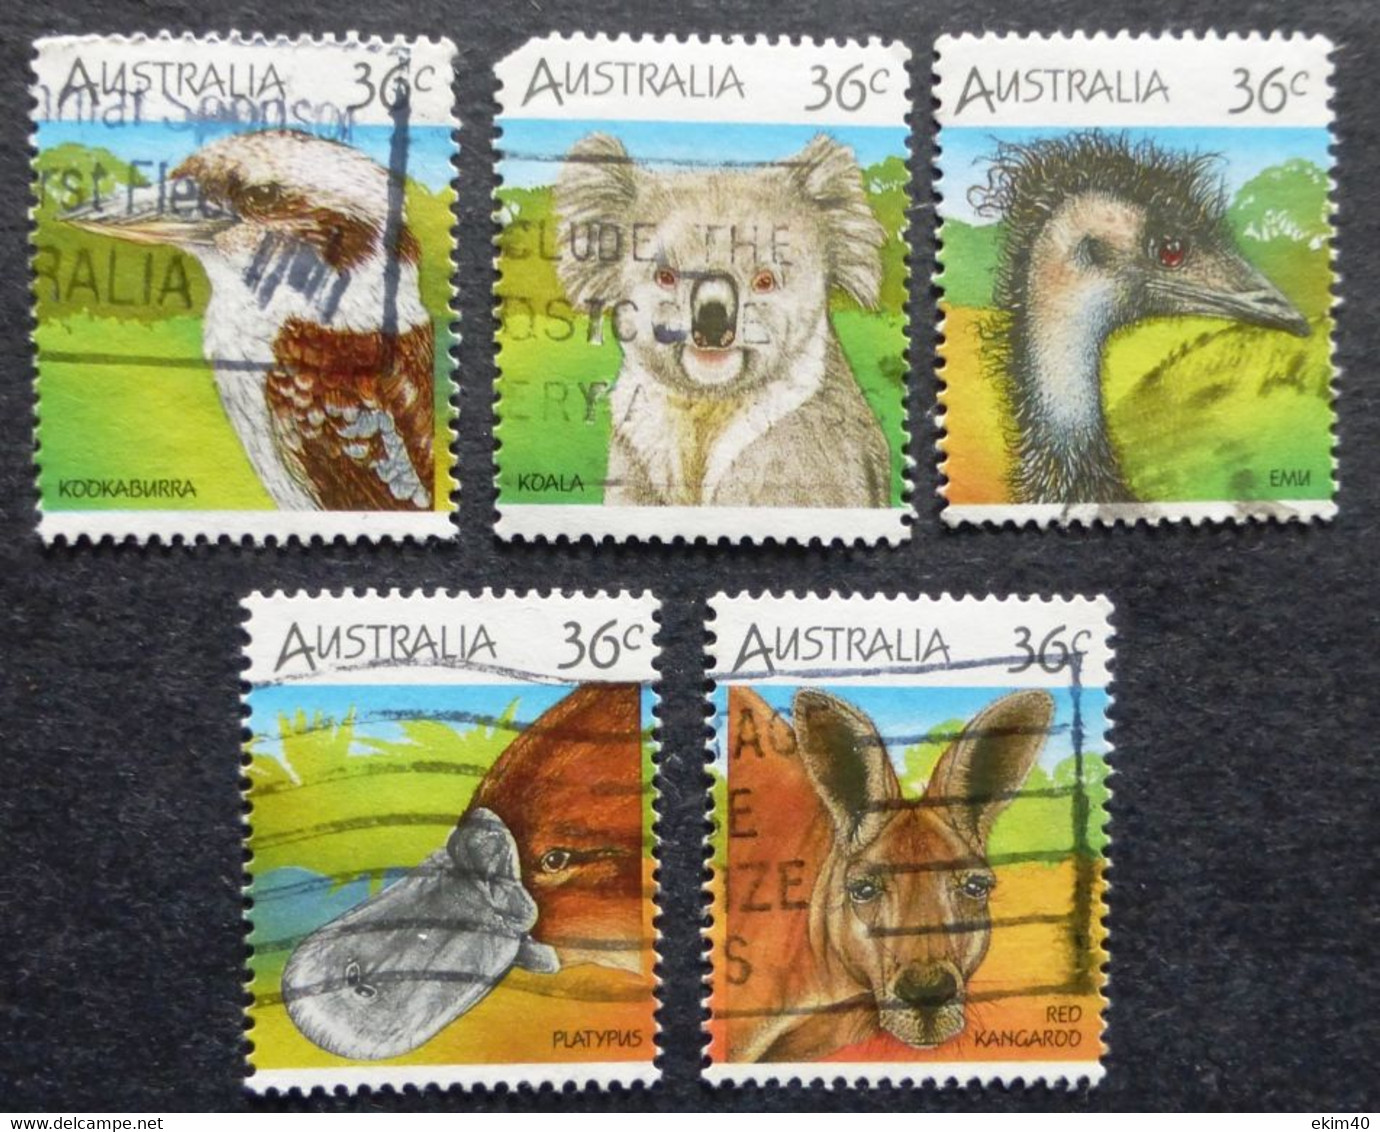 Selection Of Used/Cancelled Stamps From Australia Wild Animals. No DC-374 - Used Stamps